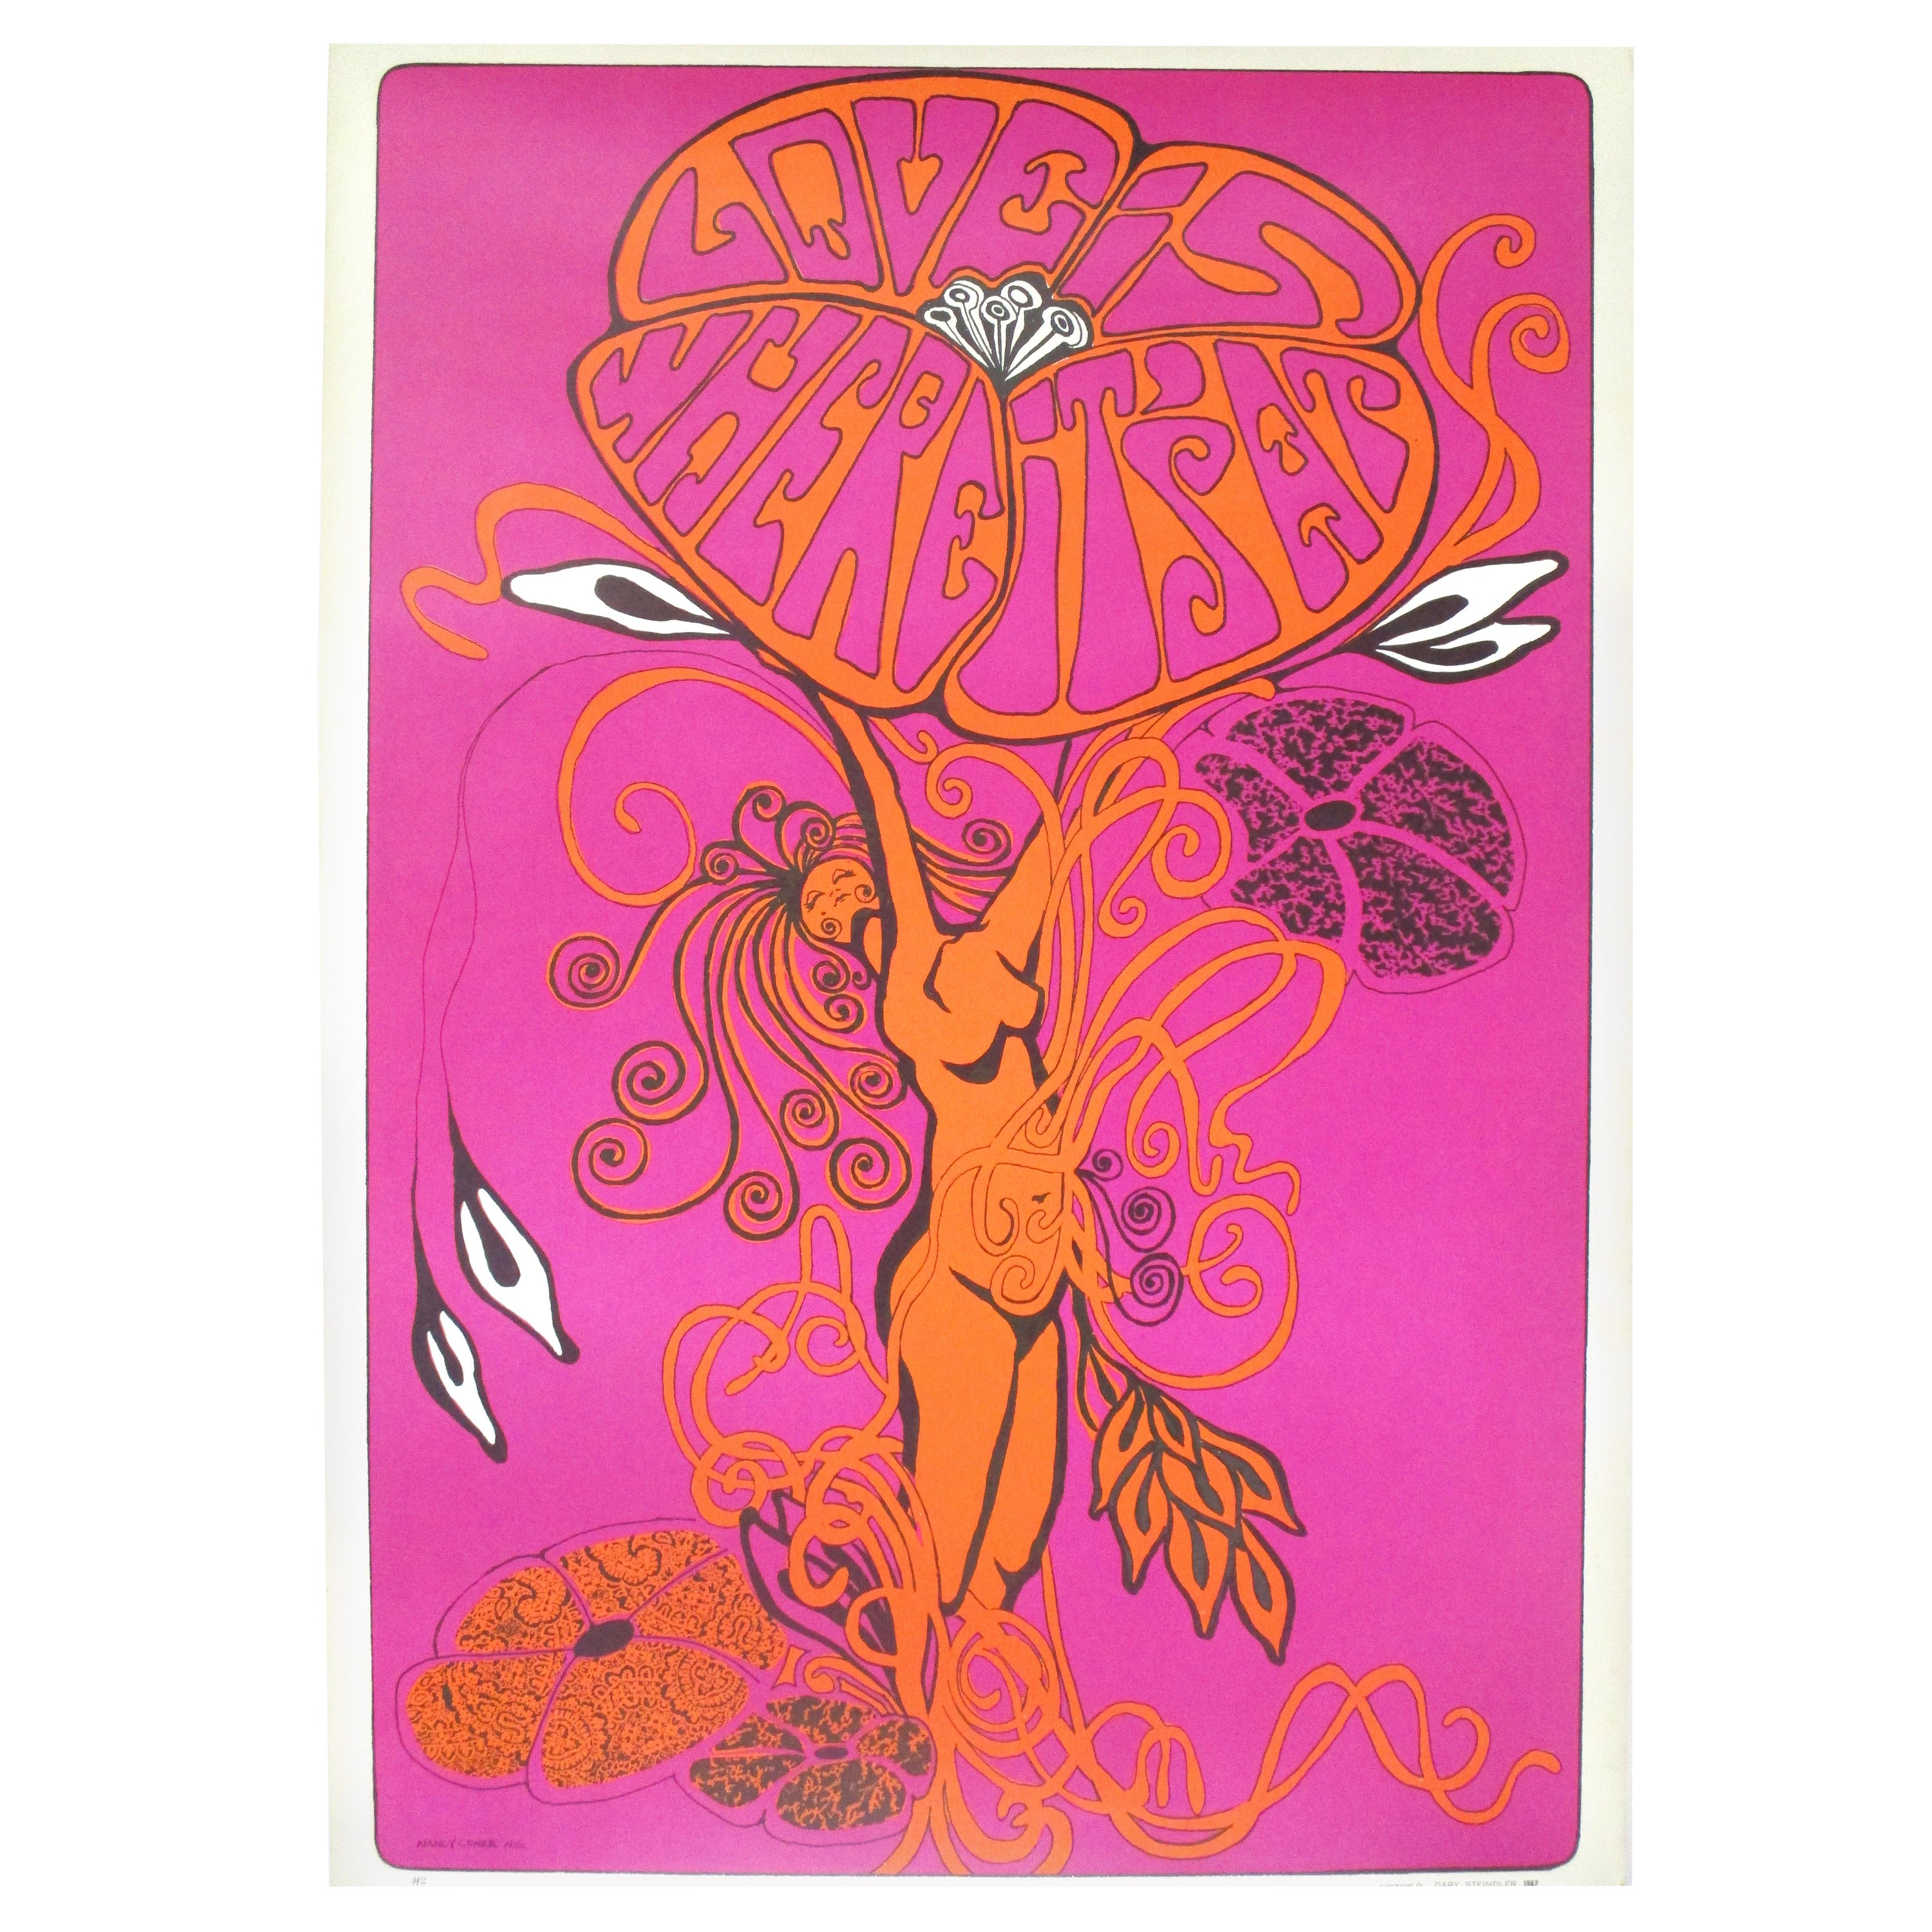 Psychedelic 1967 Poster by Nancy Conner For Sale